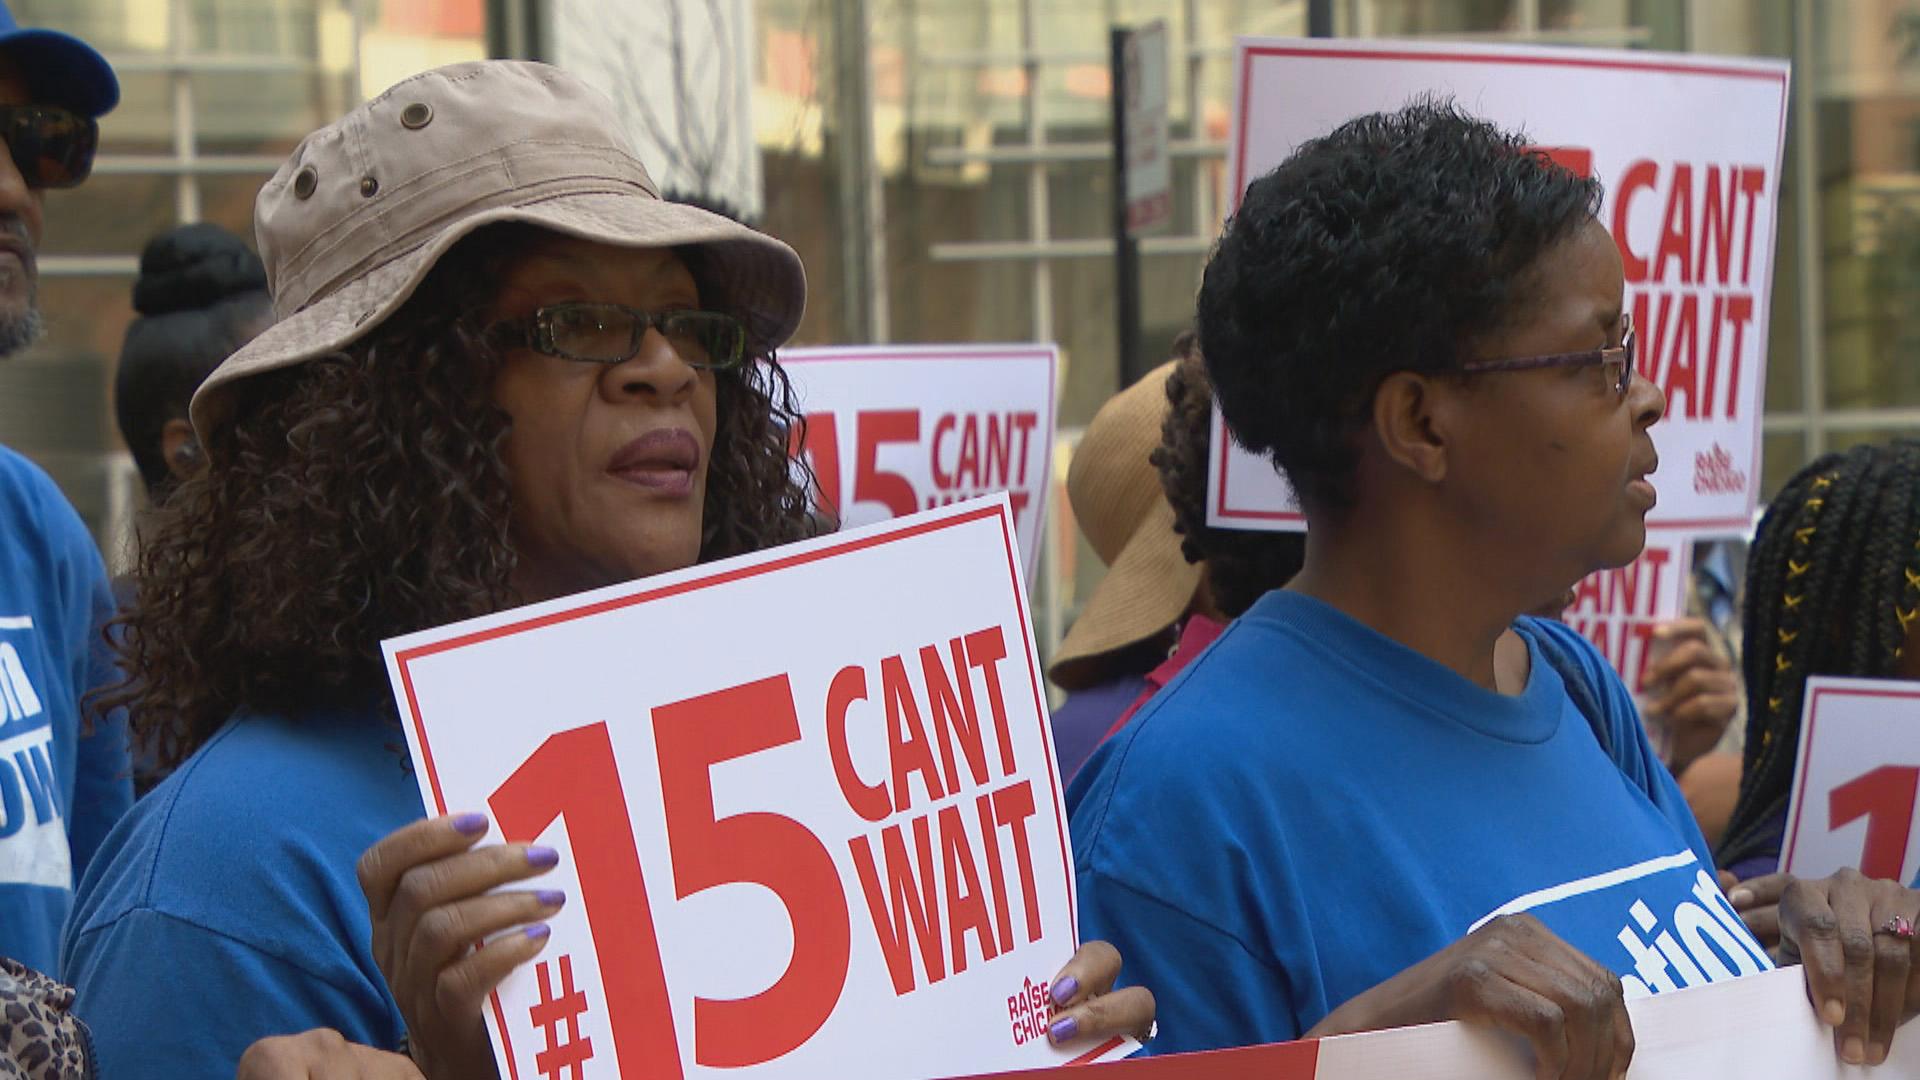 Labor activists join some public officials downtown for a rally in support of raising the minimum wage in August 2019. (WTTW News)